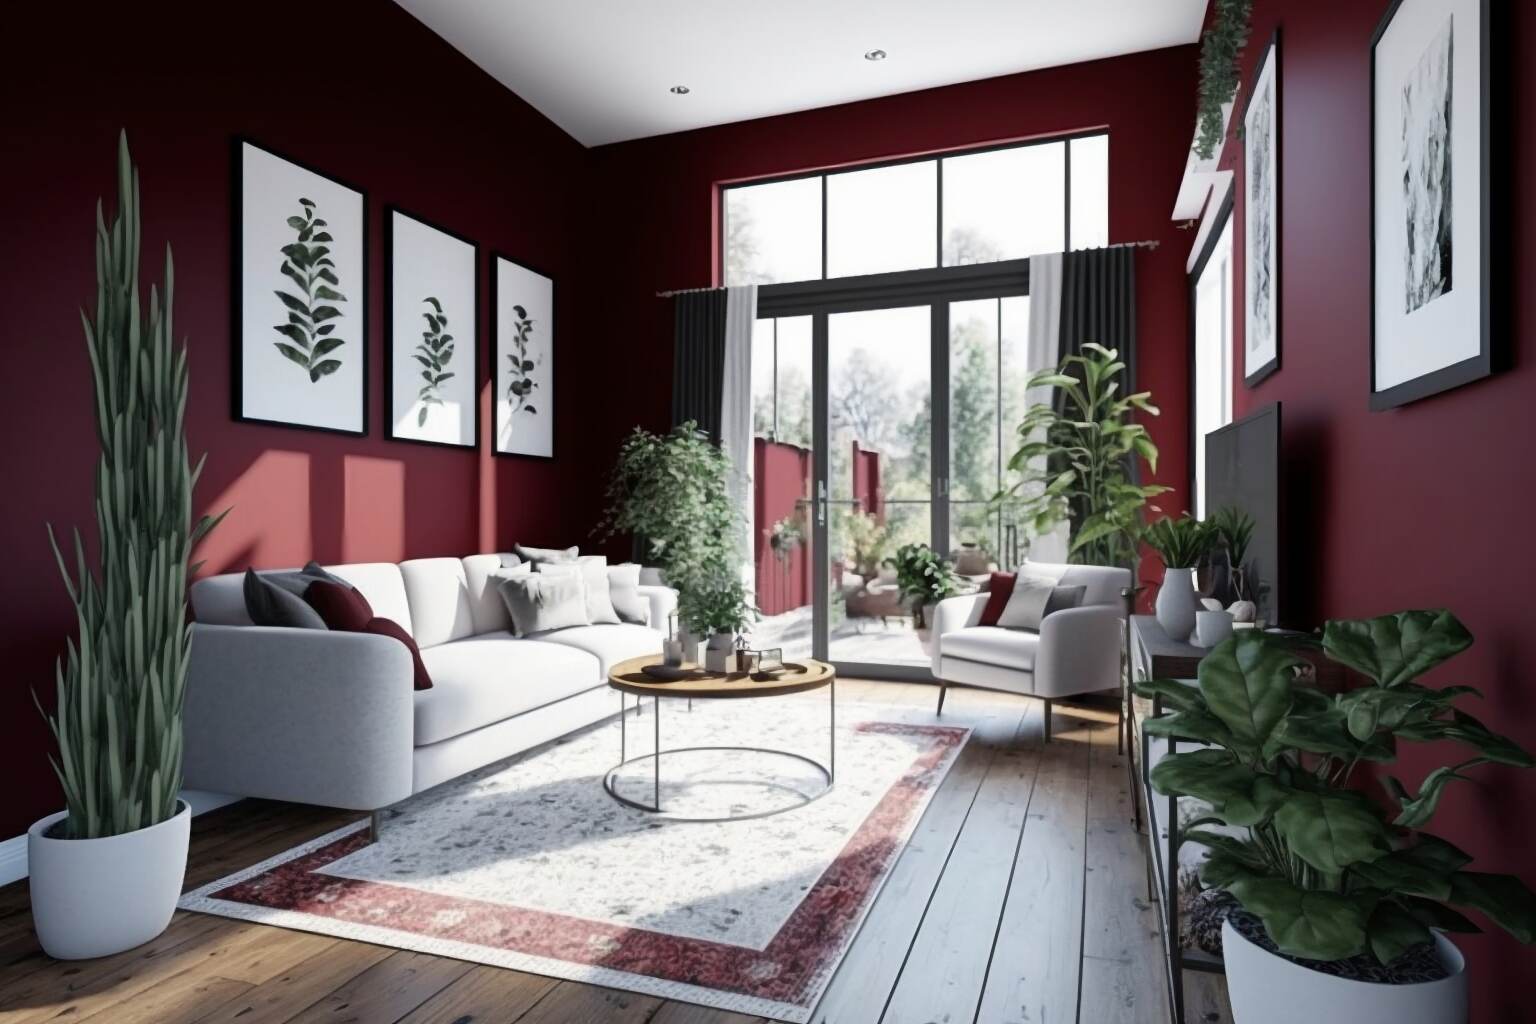 A Living Room With Deep Red Walls Contrasting With White